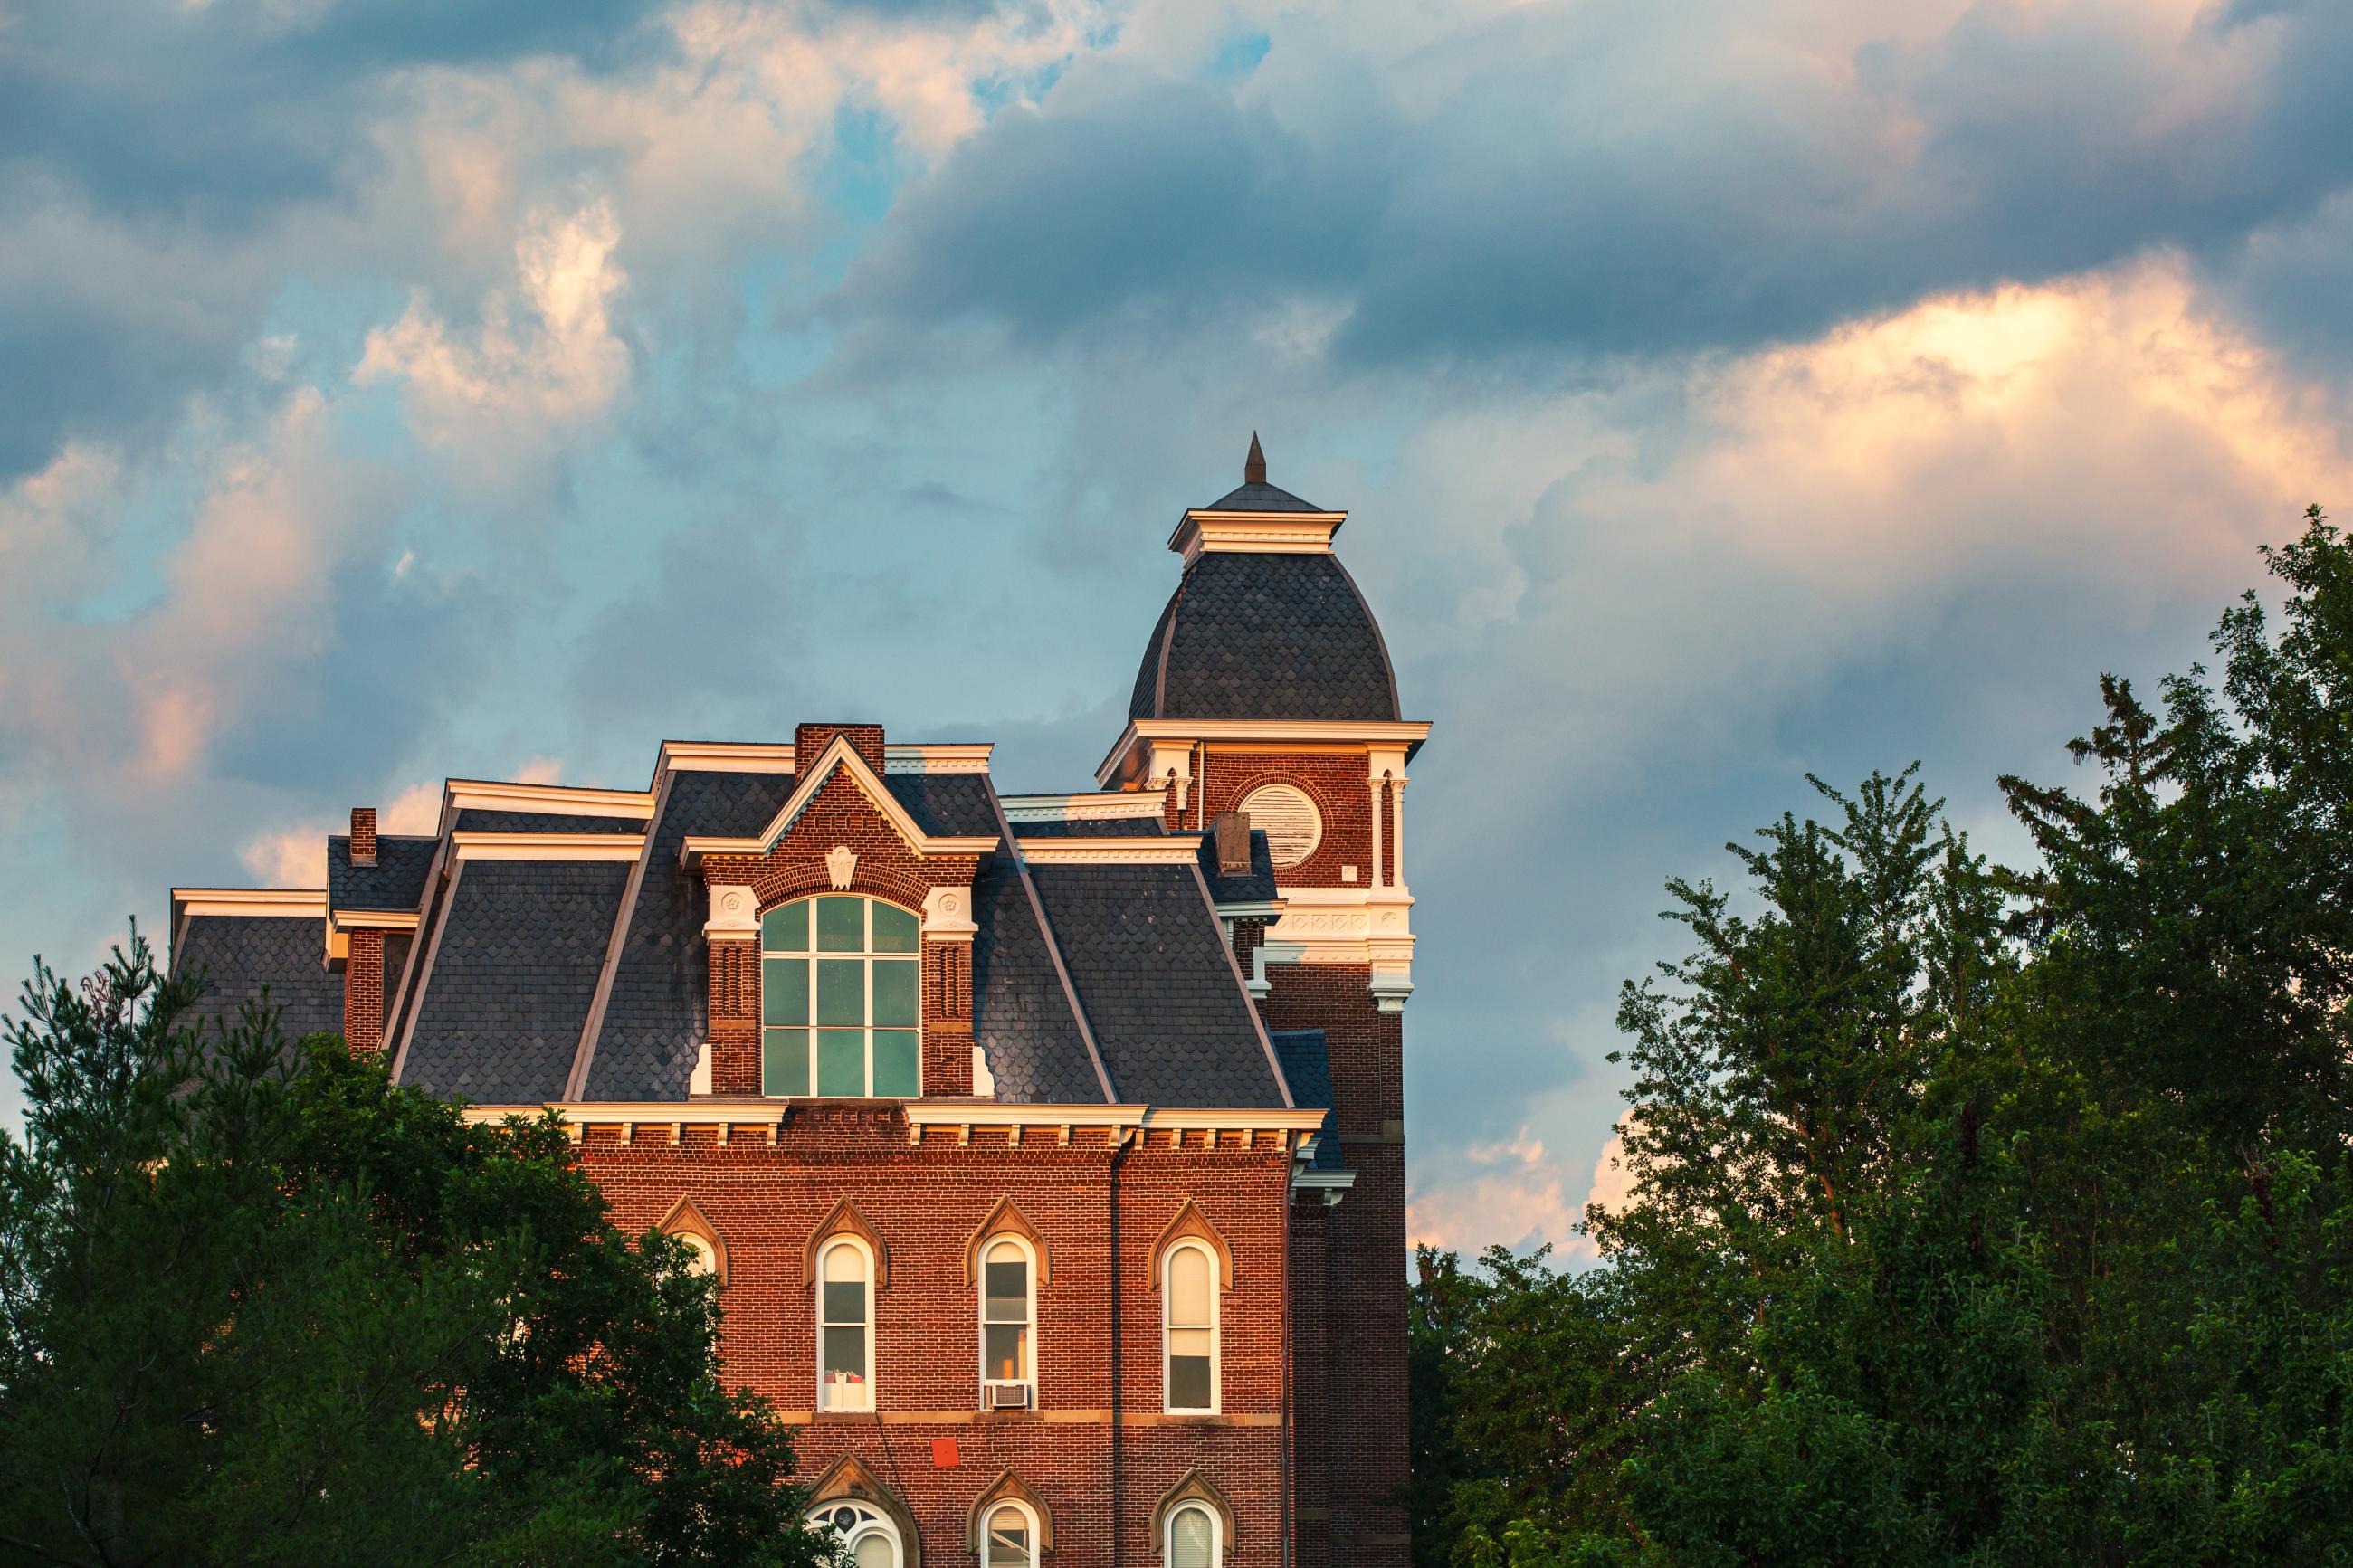 Miller Hall at dusk with saturated colors